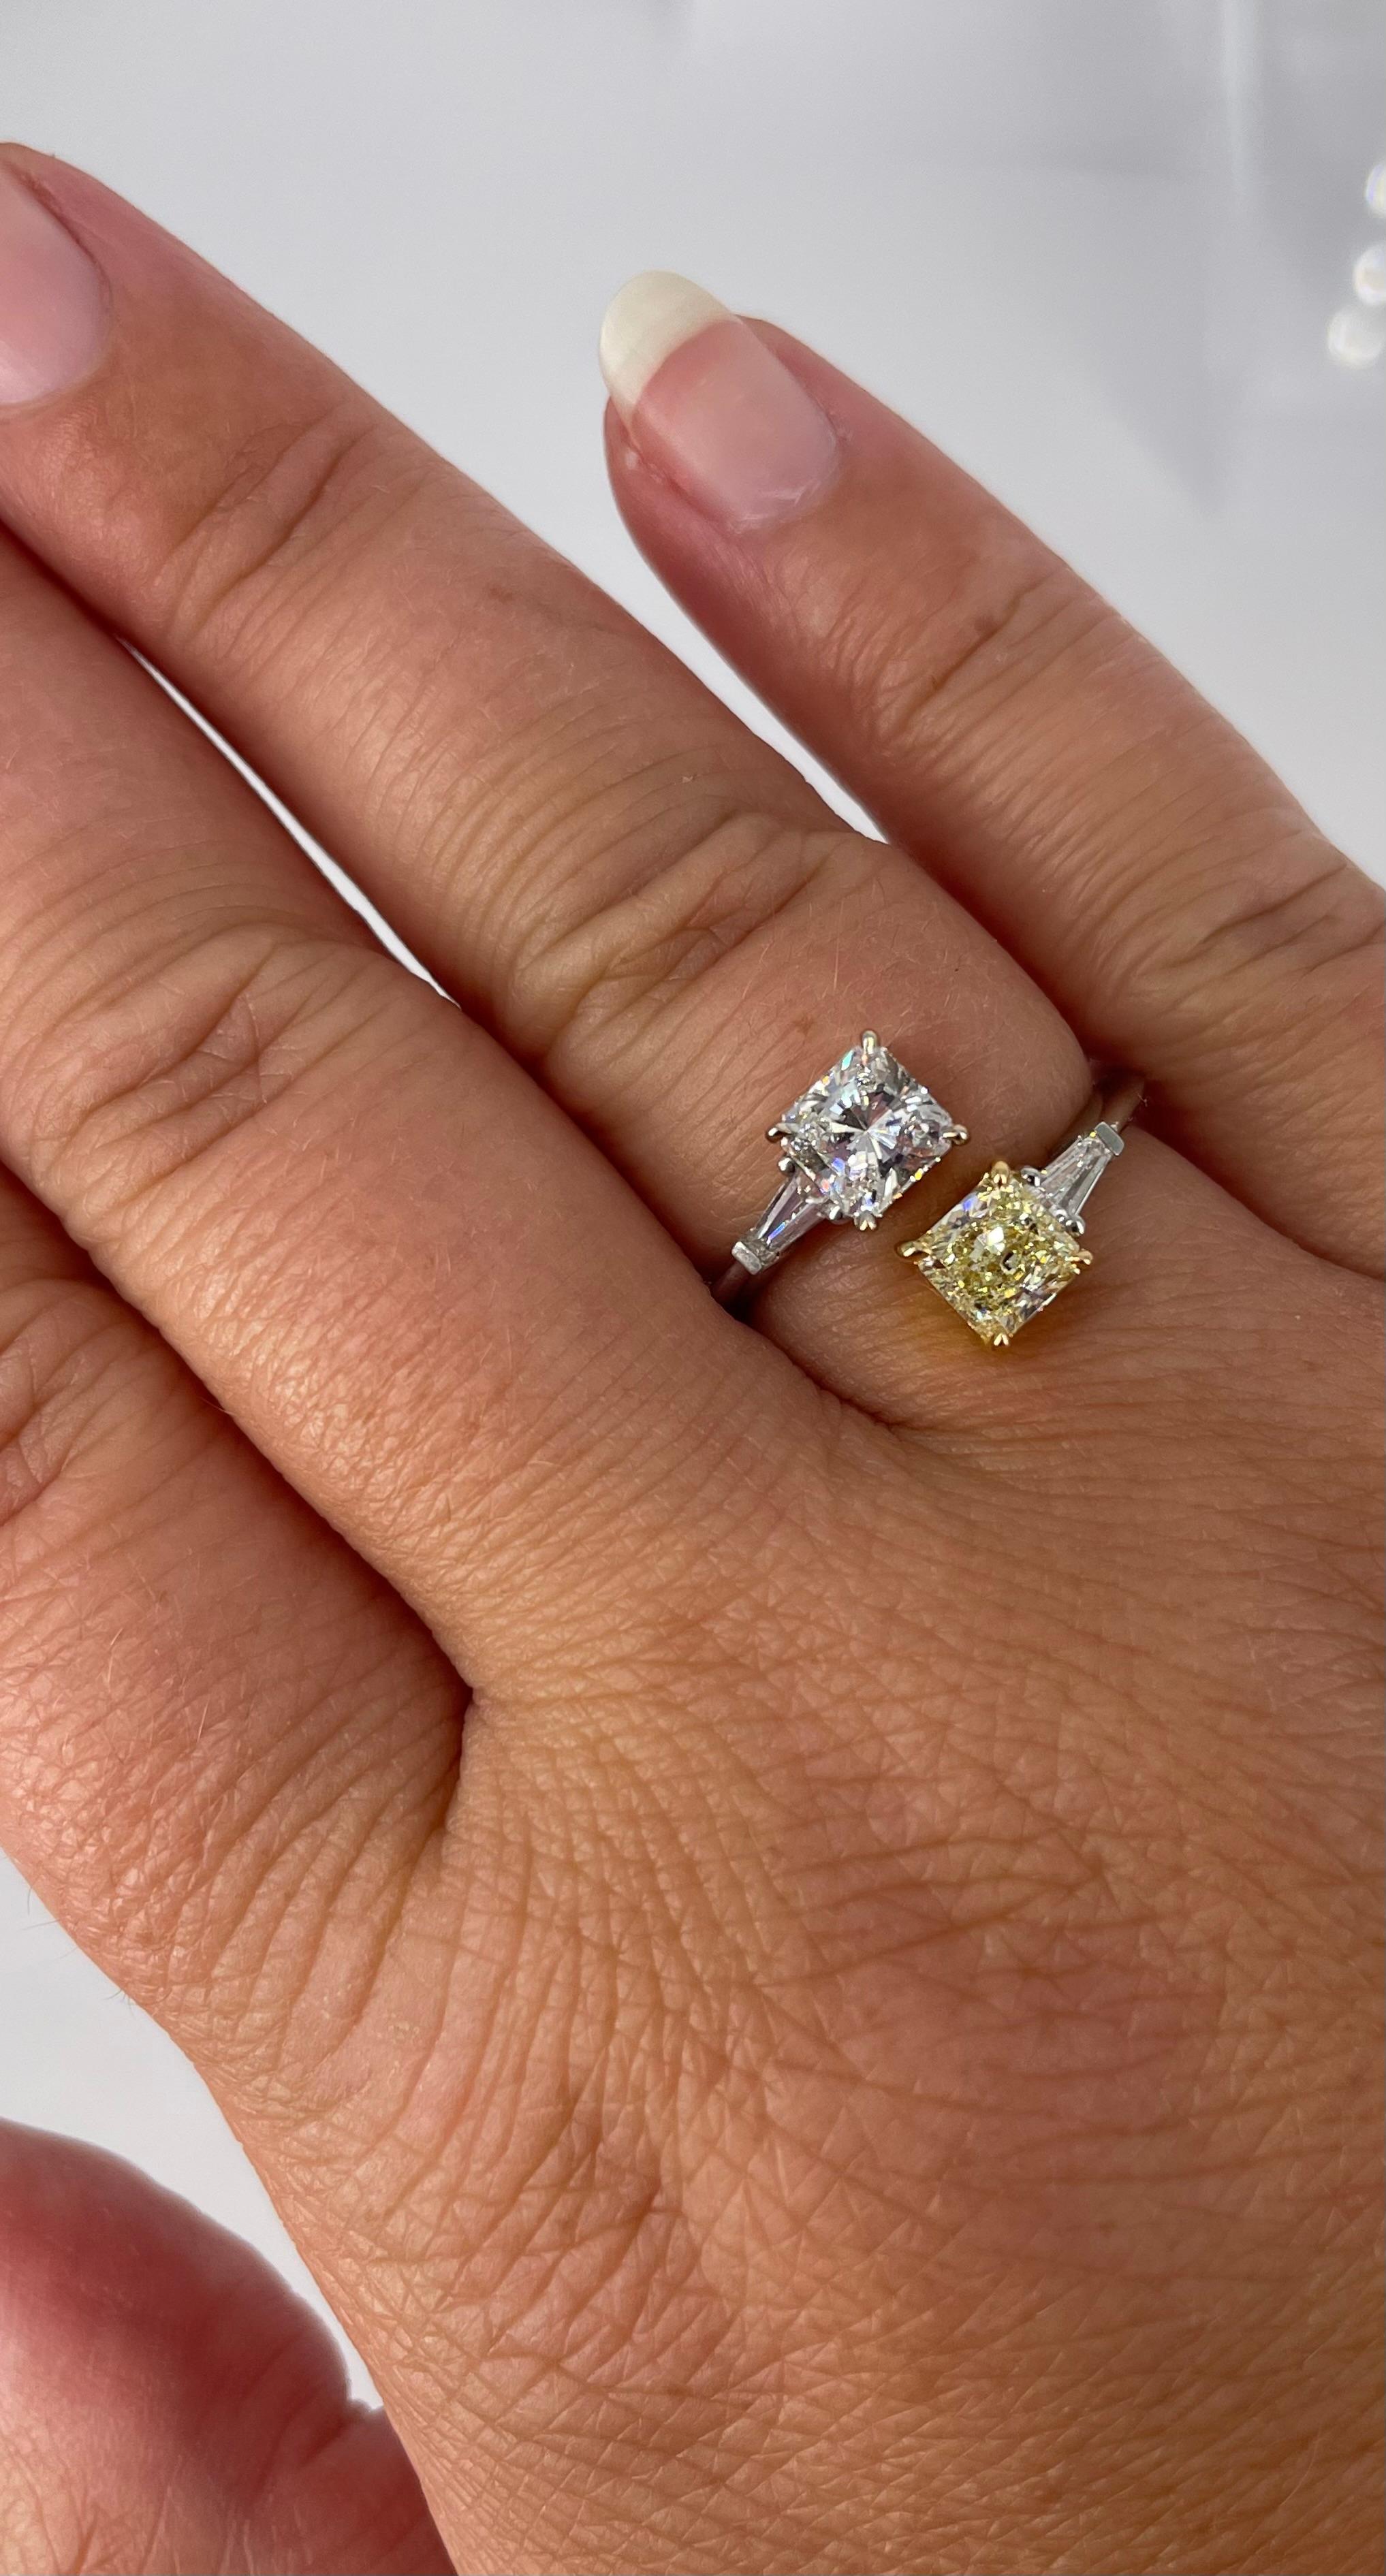 An elegant and unique take on the two stone ring trend! This stunning Toi et Moi ring complements any finger, and could also work as a one of a kind engagement ring. This piece features a 0.61 carat white radiant cut diamond, certified by GIA to be